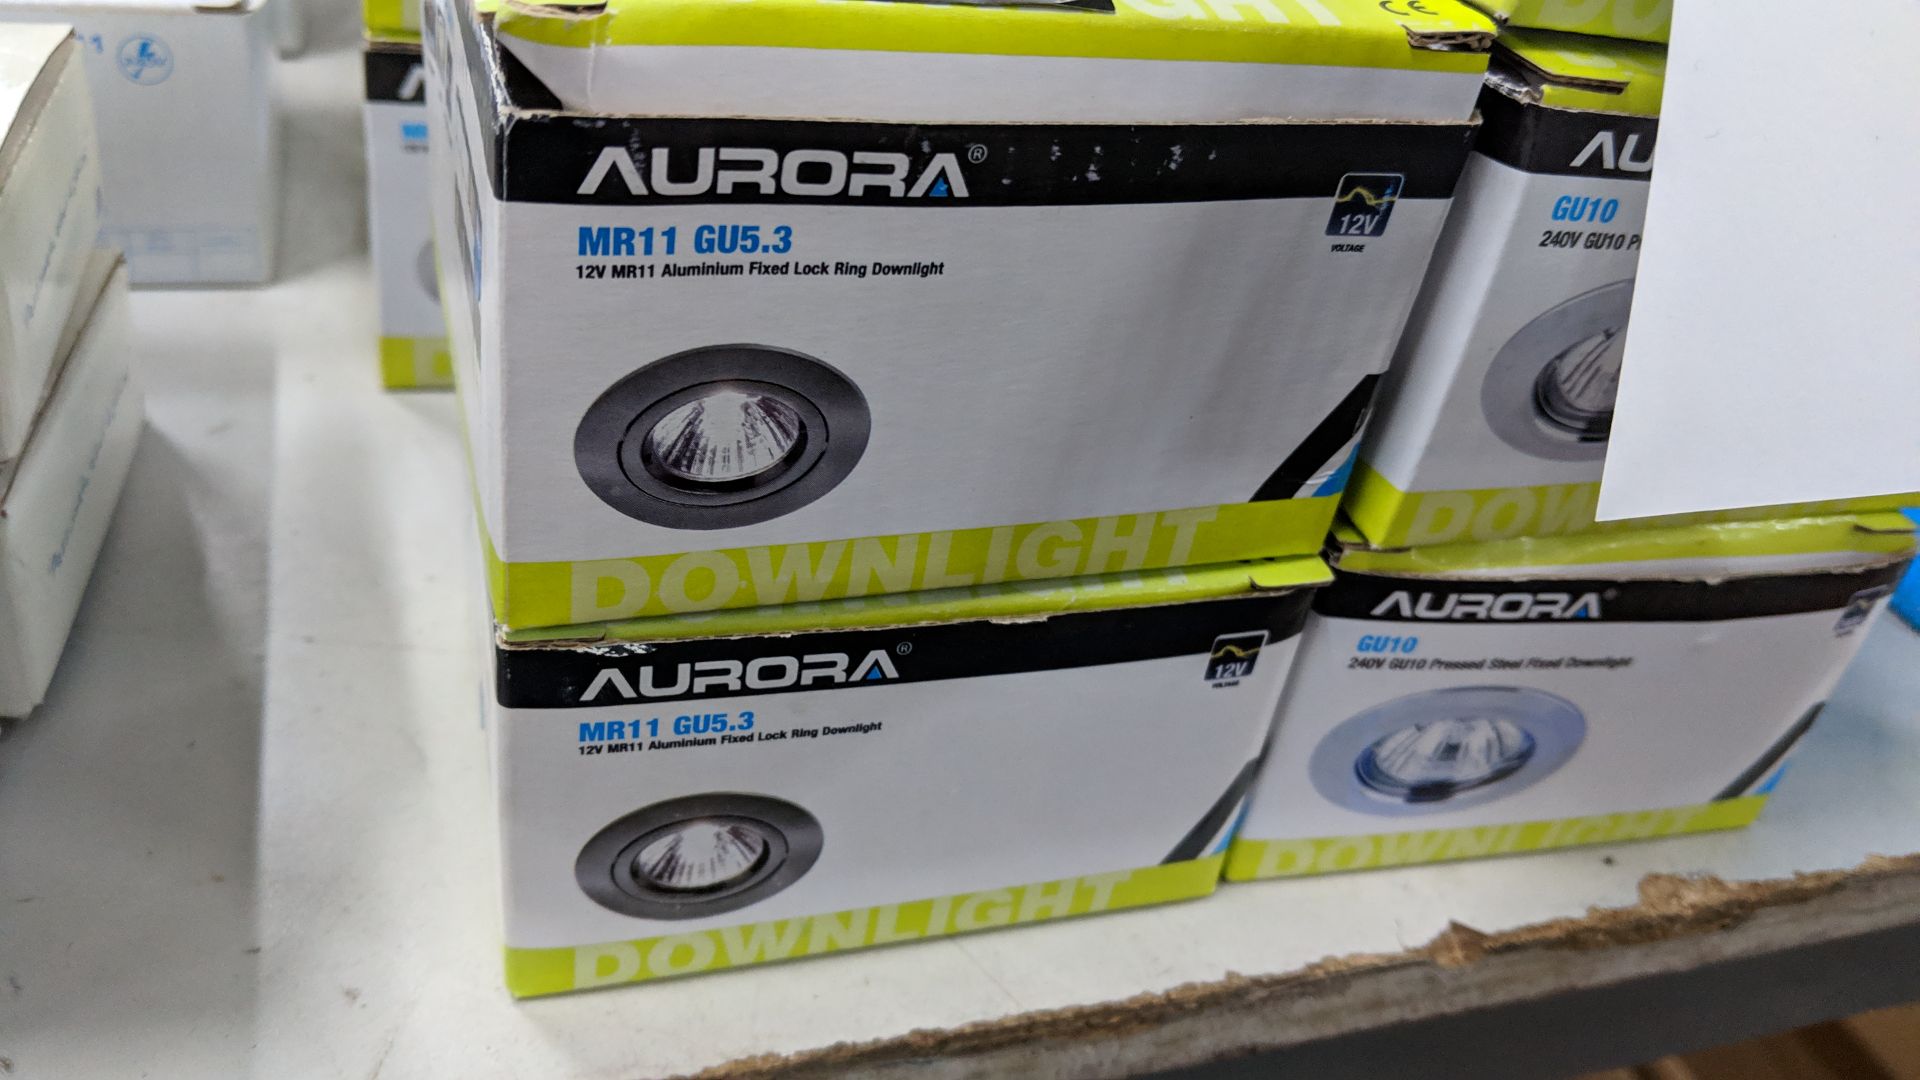 19 off assorted Aurora GU10 & GU5.3 downlights This lot is one of a number of lots in this sale - Image 2 of 3